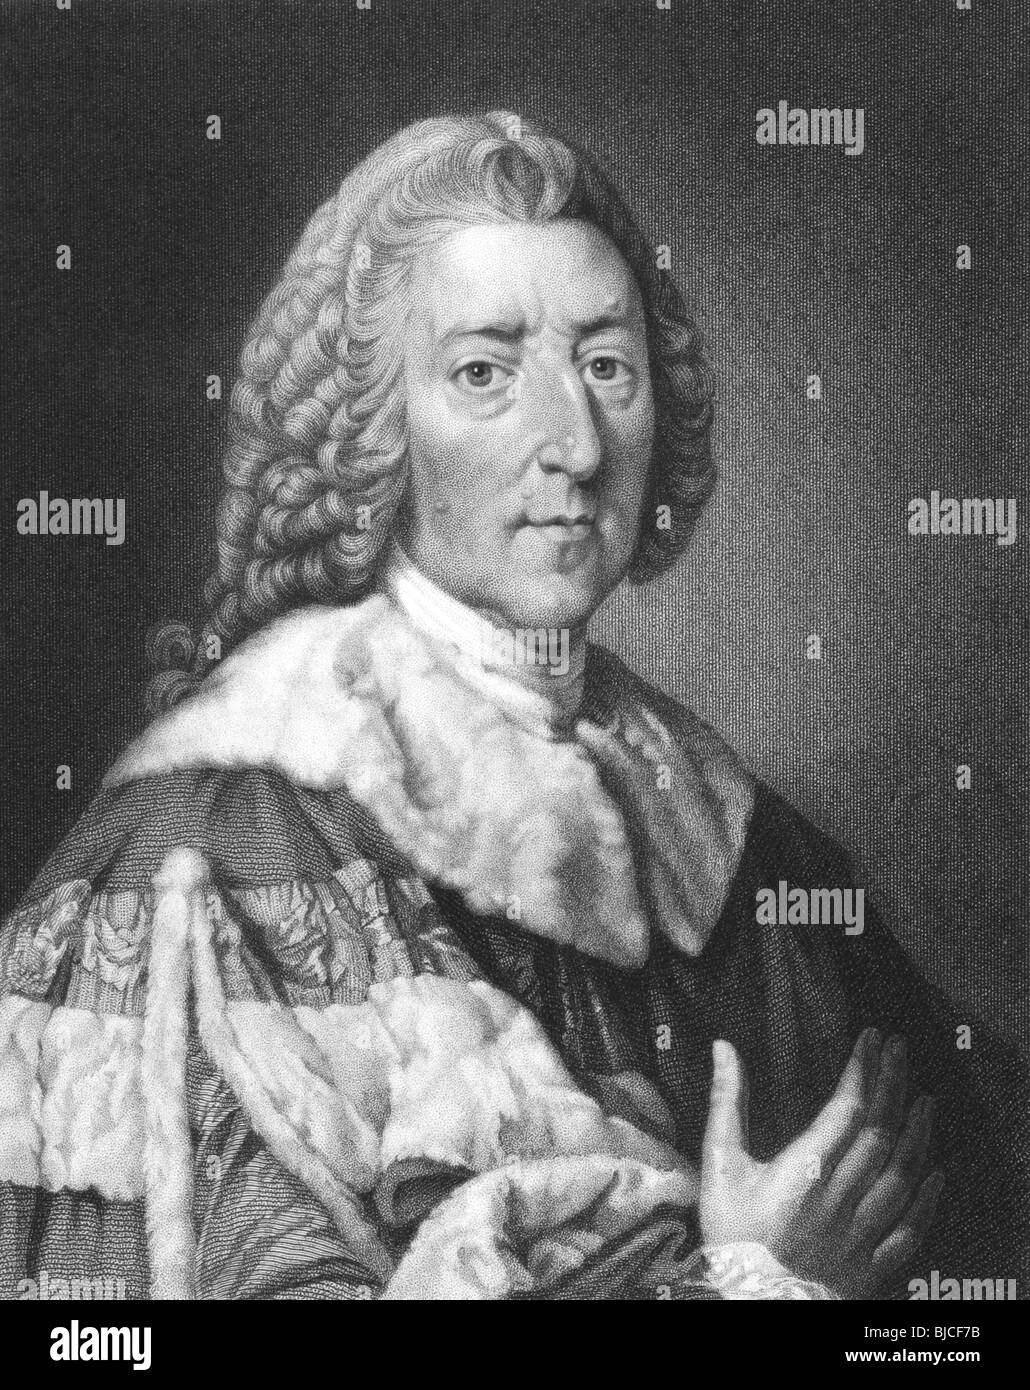 William Pitt 1st Earl of Chatham (1708-1778) on engraving from the 1800s. British statesman. Stock Photo